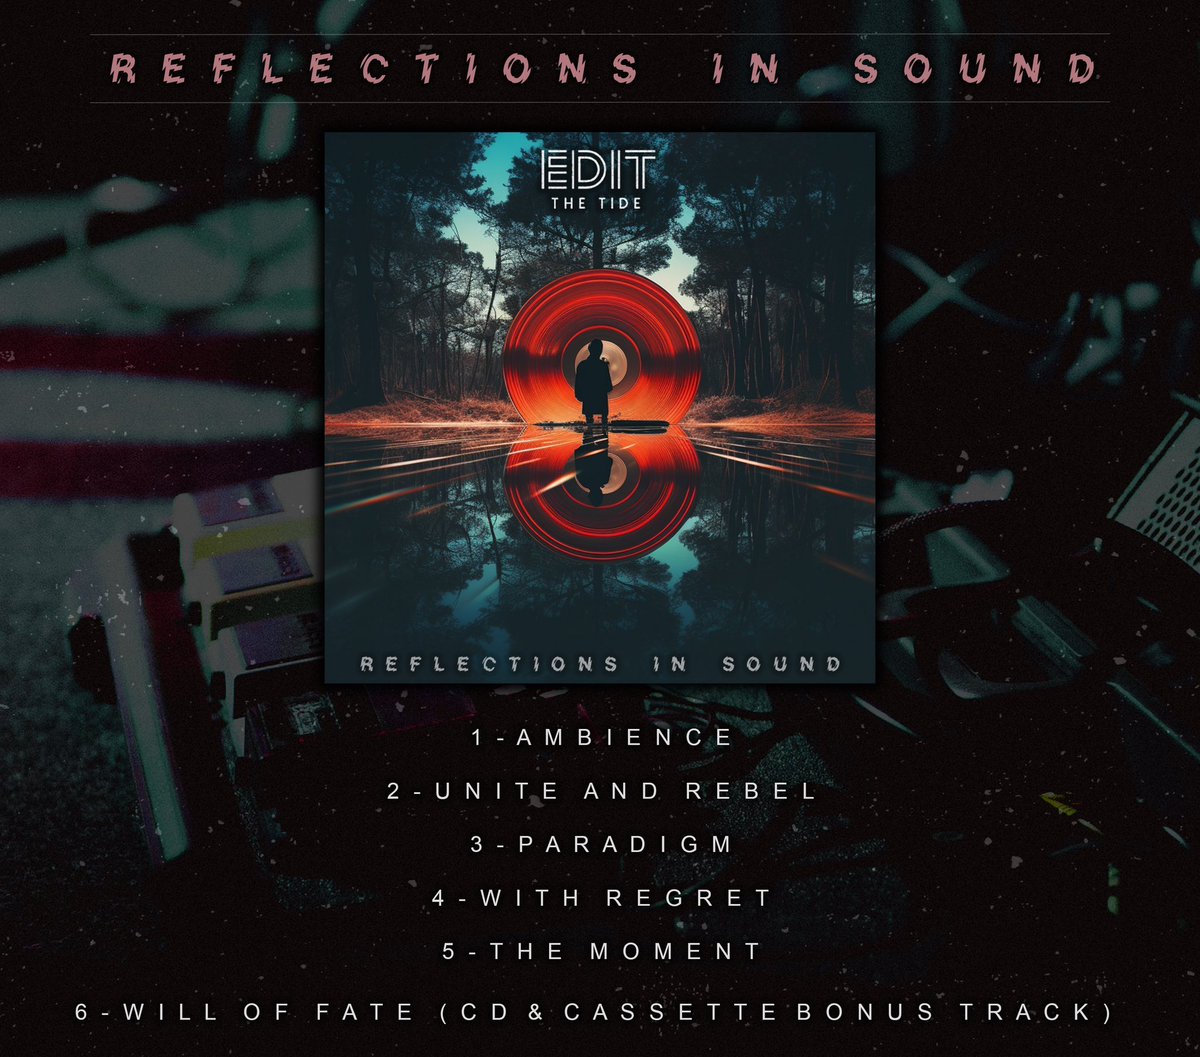 Just over 1 week until we release our Debut EP 🔴 Reflections In Sound 🔴 Here’s the track-listing! 🎧 We are nearly Sold Out of CDs so if you’ve been thinking of picking one up then now’s the time ⏳ editthetide.myshopify.com Once again, thankyou to everyone for your support!